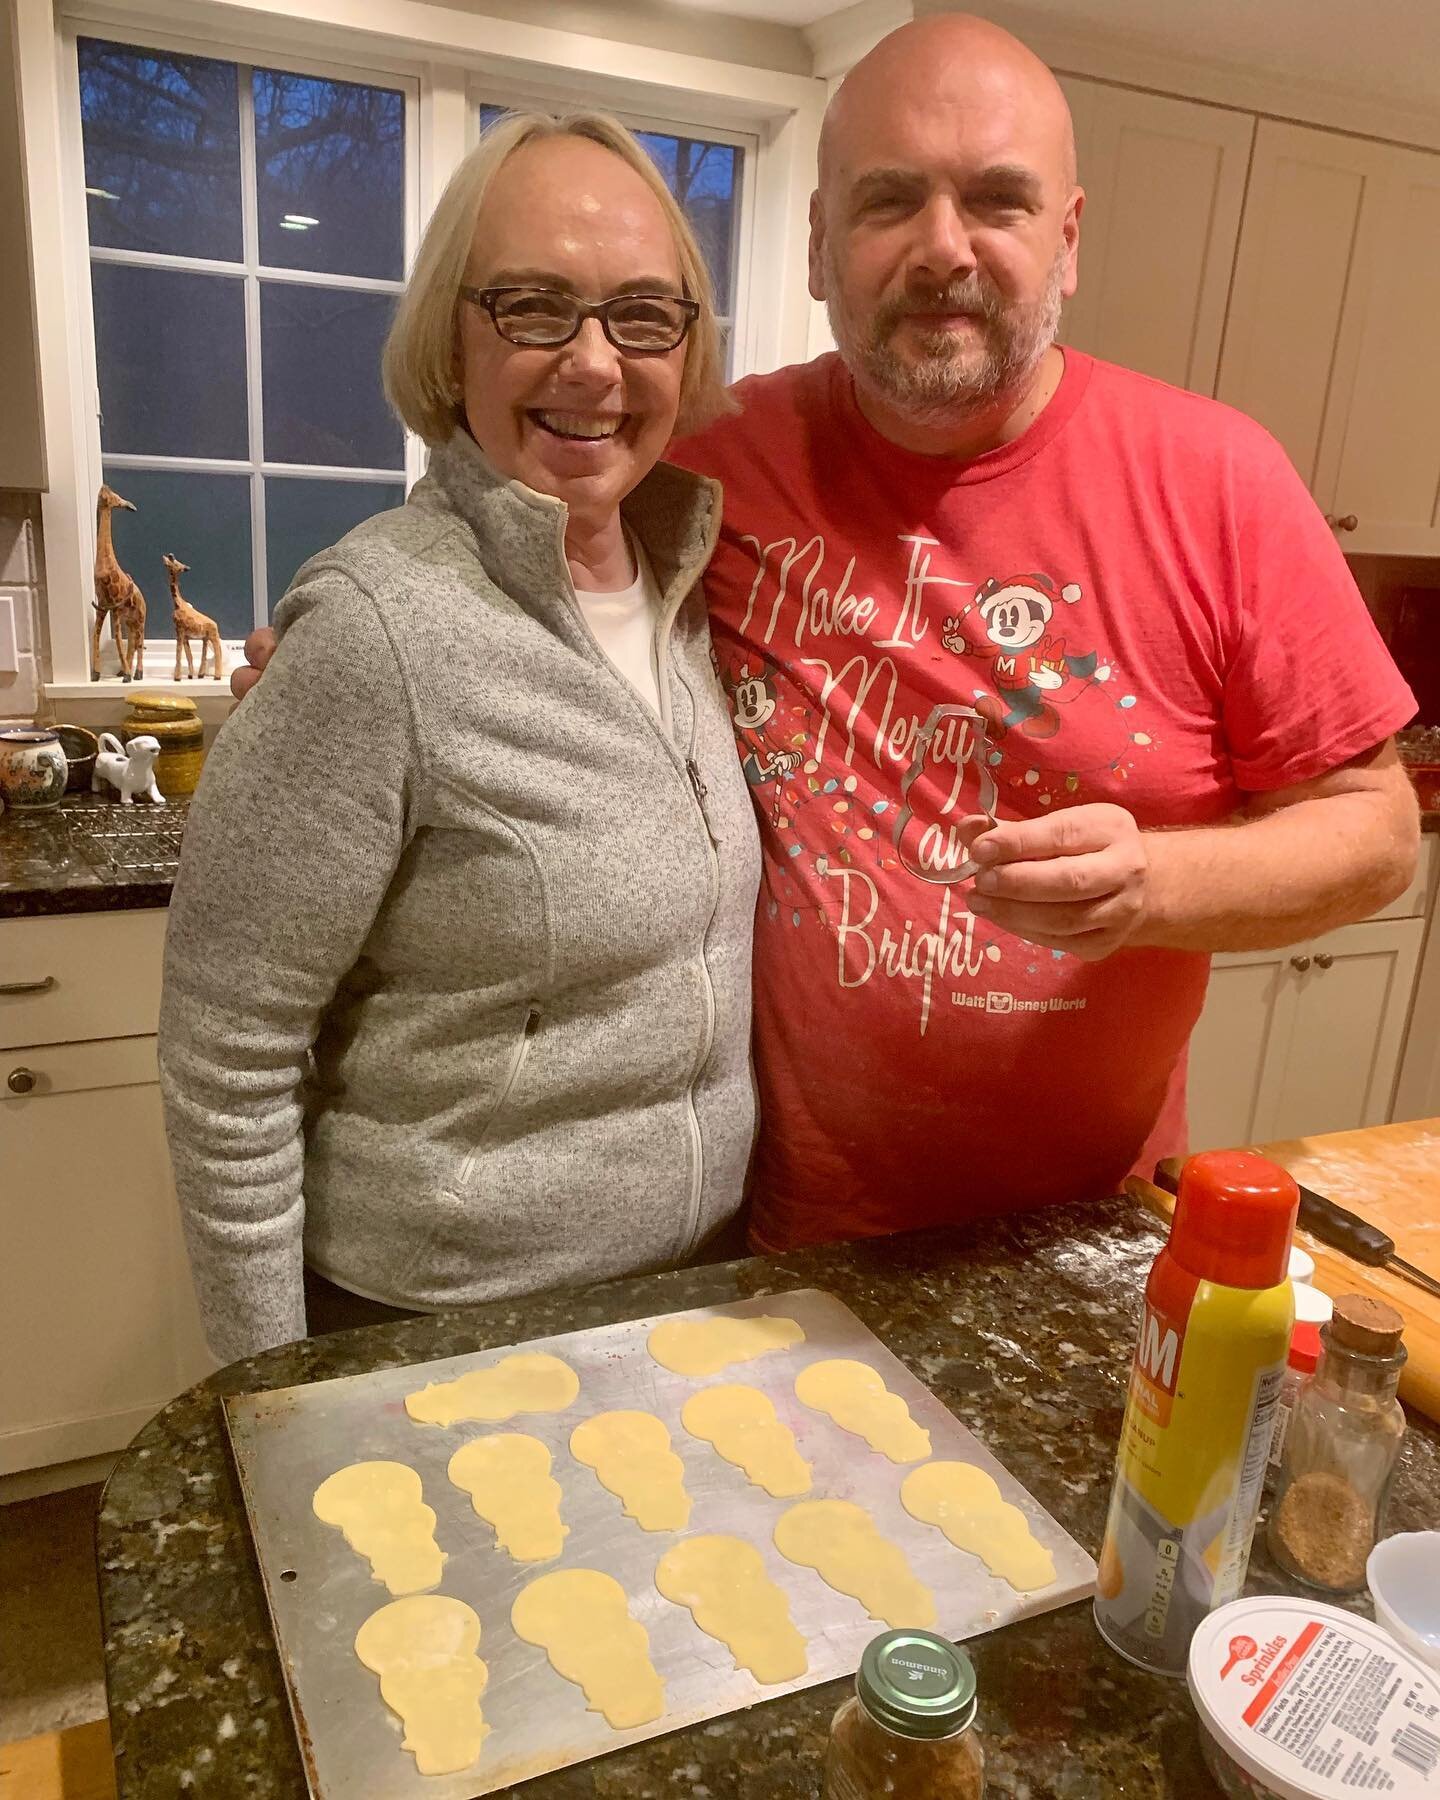 I traveled home this week to kick off Christmas with my parents, decorating and baking. These two days will be some of the most memorable this season. I feel truly blessed. 
.
Mom making her mothers amazing Christmas cookies .
.
Dad and candy cane co